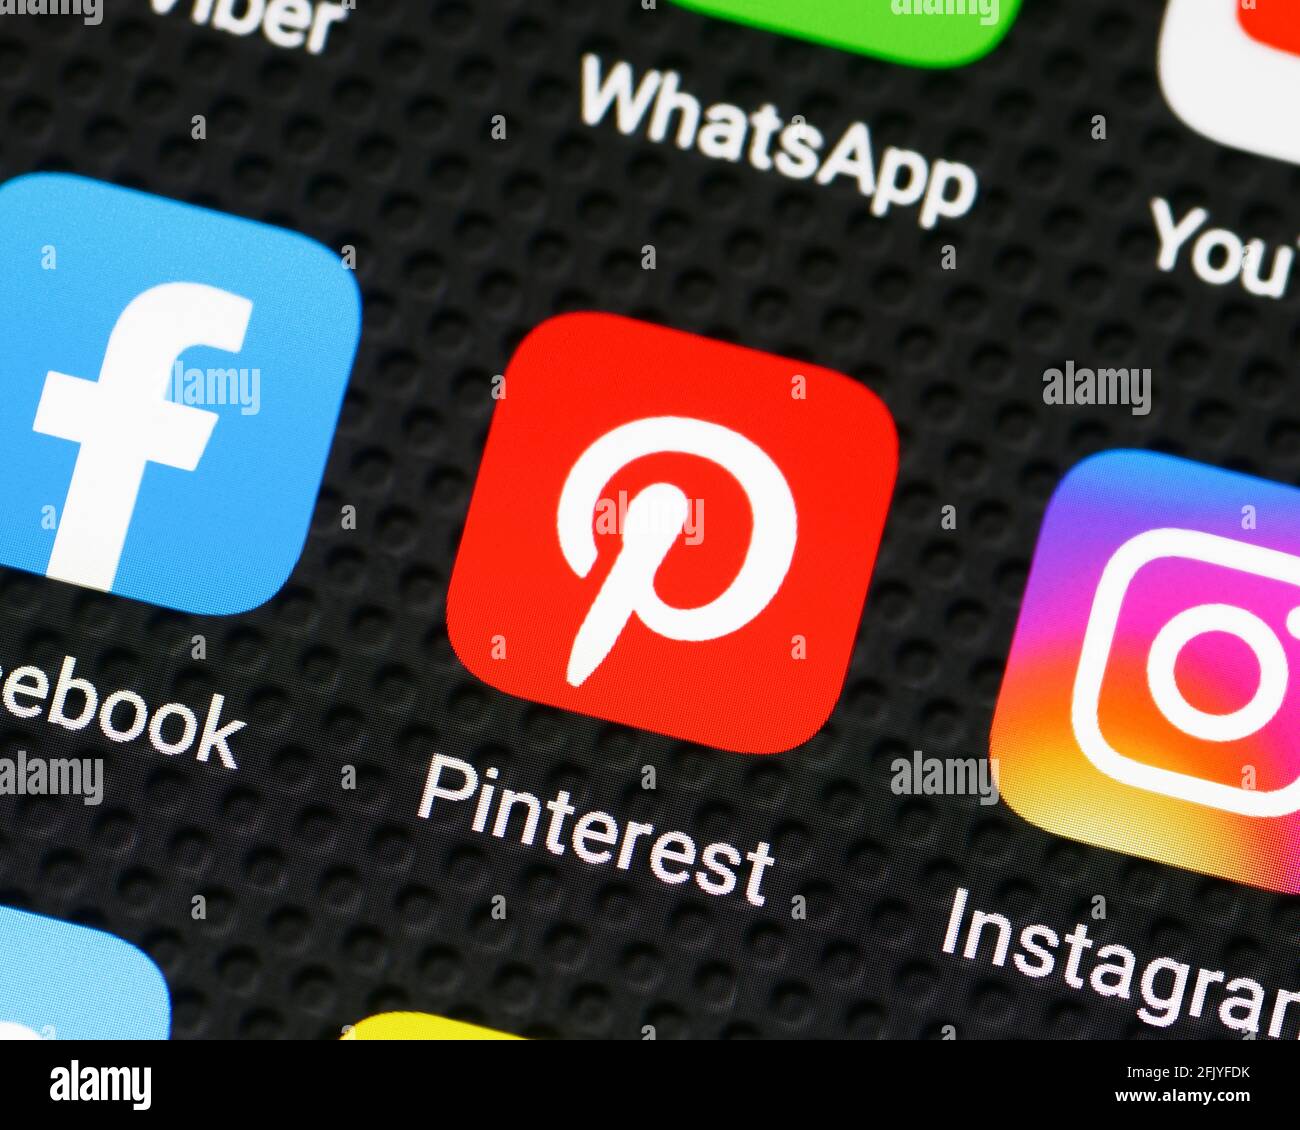 Pinterest App Icon on a Smartphone, Close Up Stock Photo